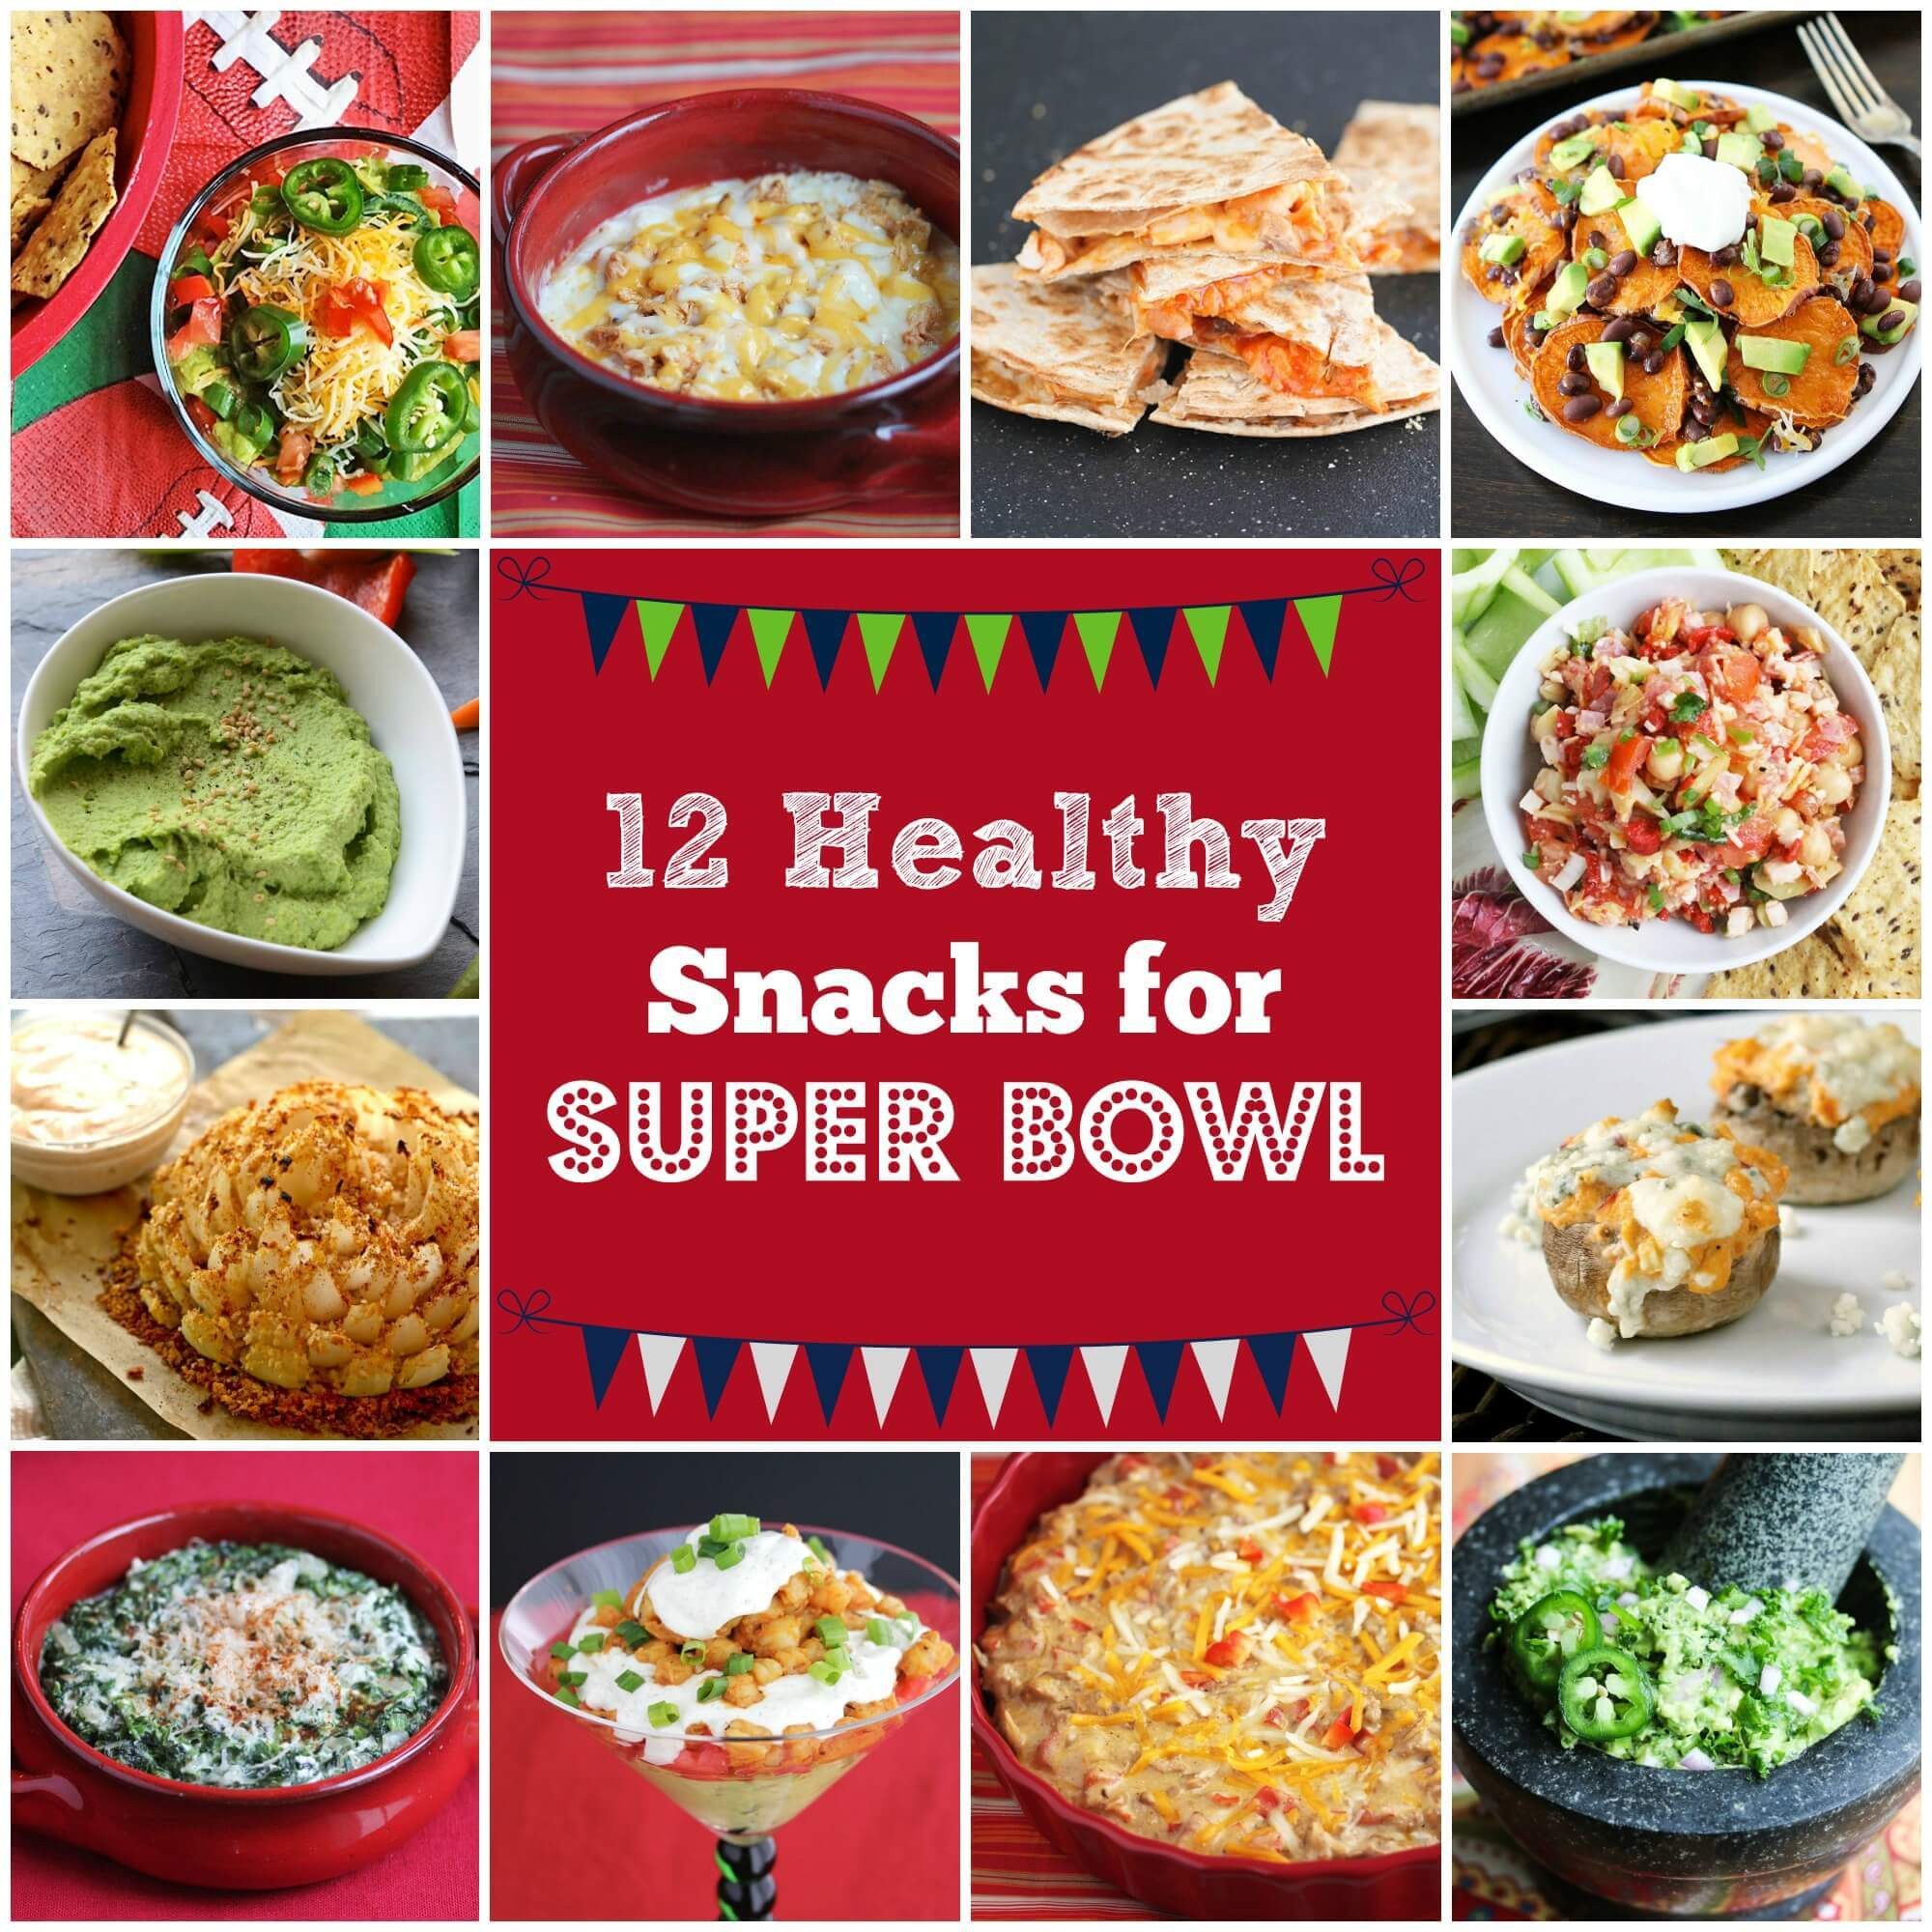 Superbowl Healthy Appetizers
 12 Healthy Super Bowl Snack Recipes Jeanette s Healthy